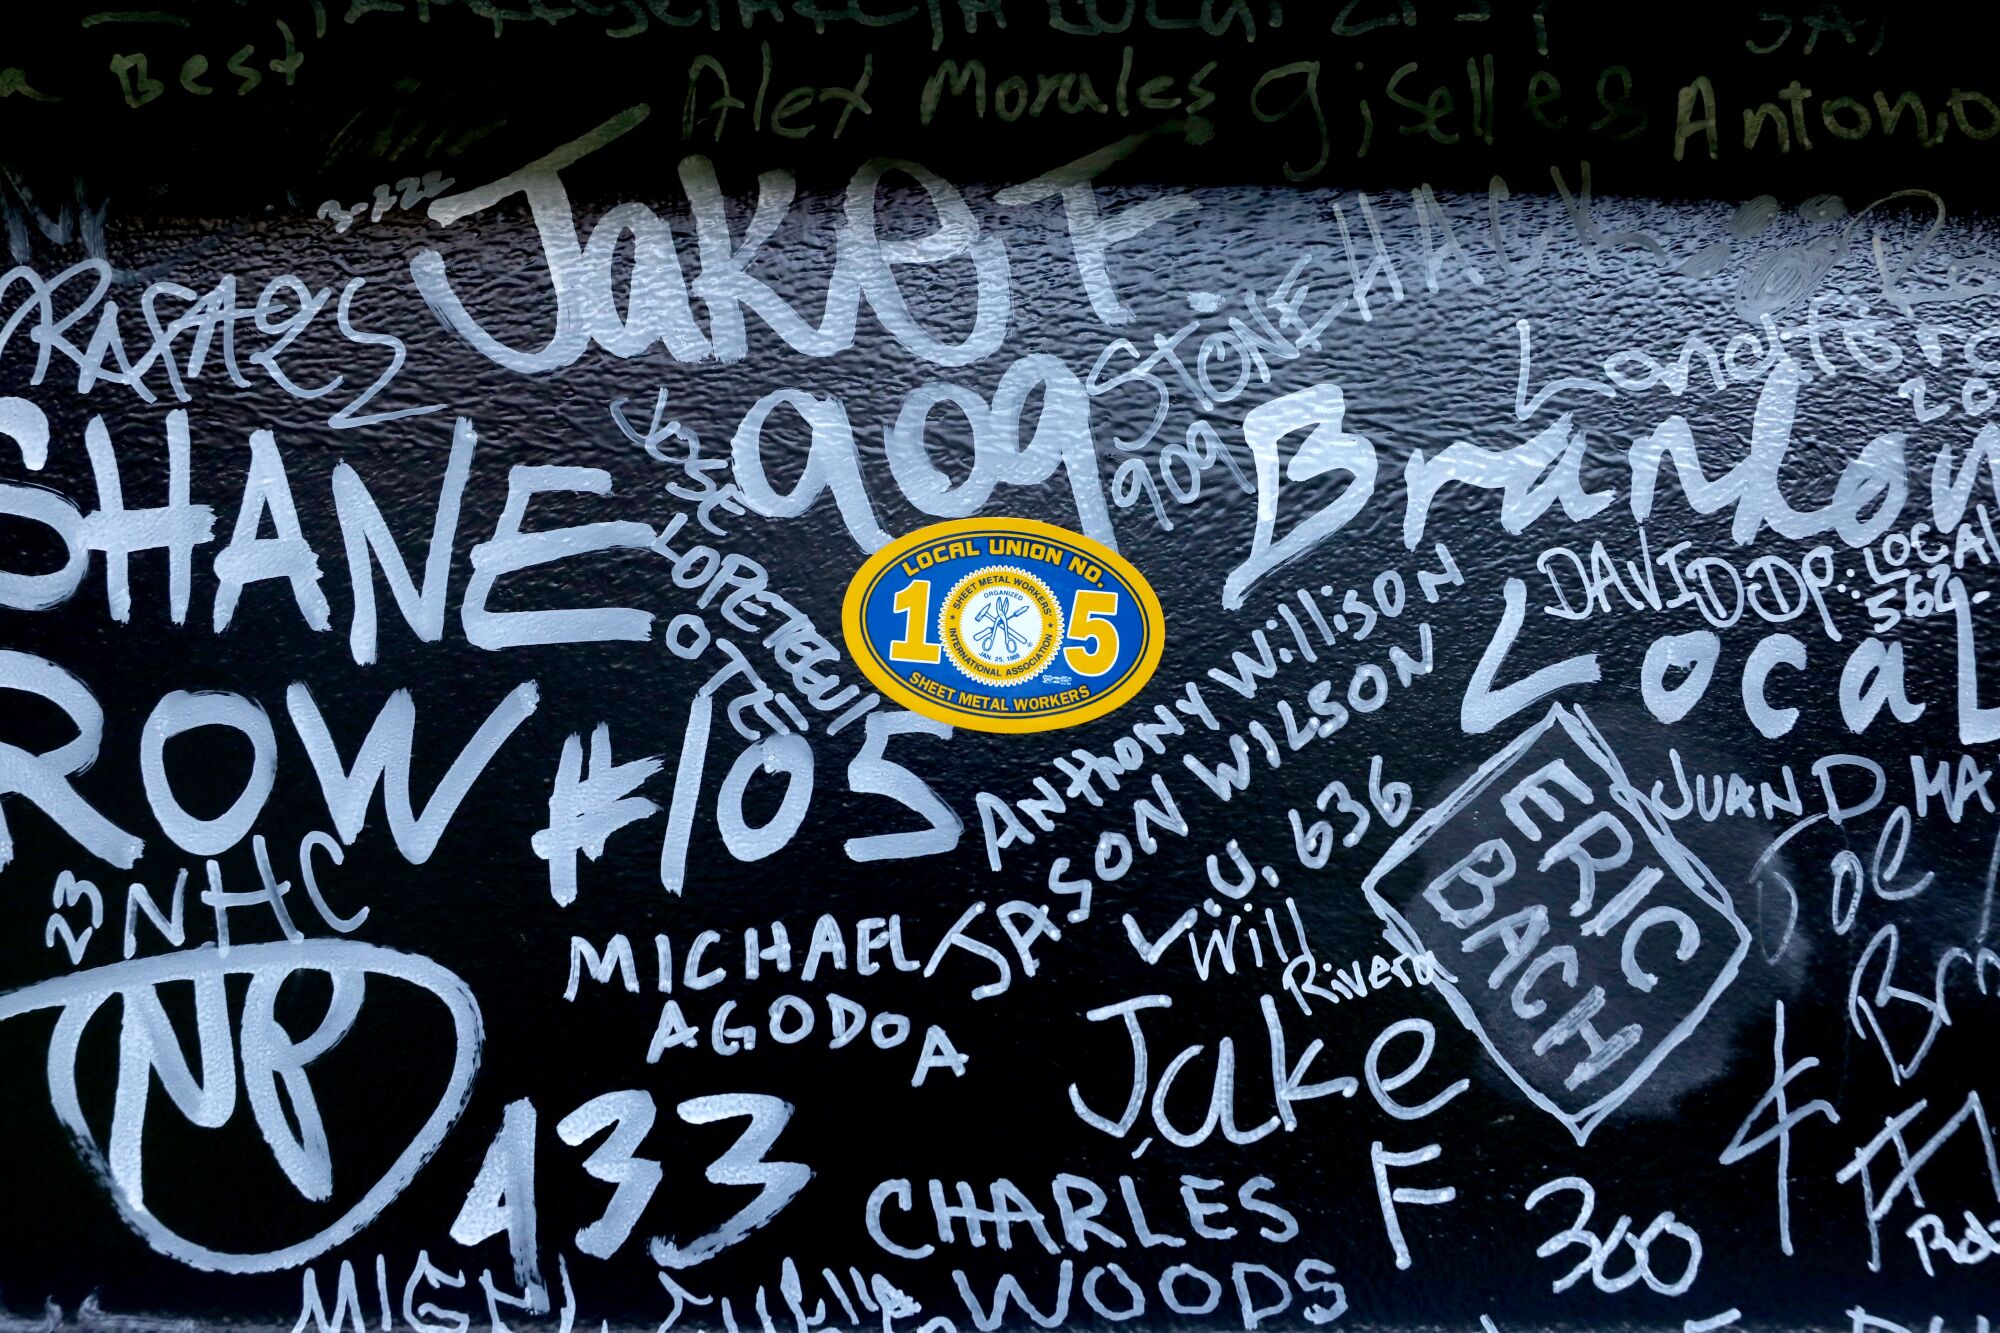 A close-up view of signatures on a steel beam that was placed atop the Intuit Dome.